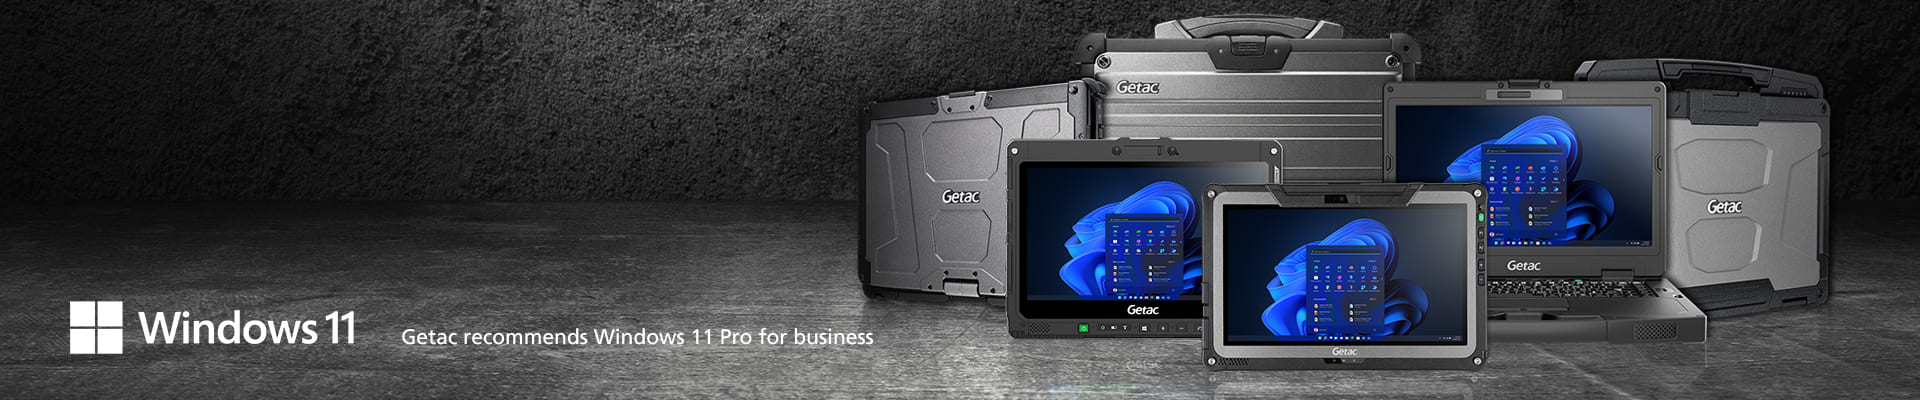 Win-11-family-without-Getac-logo